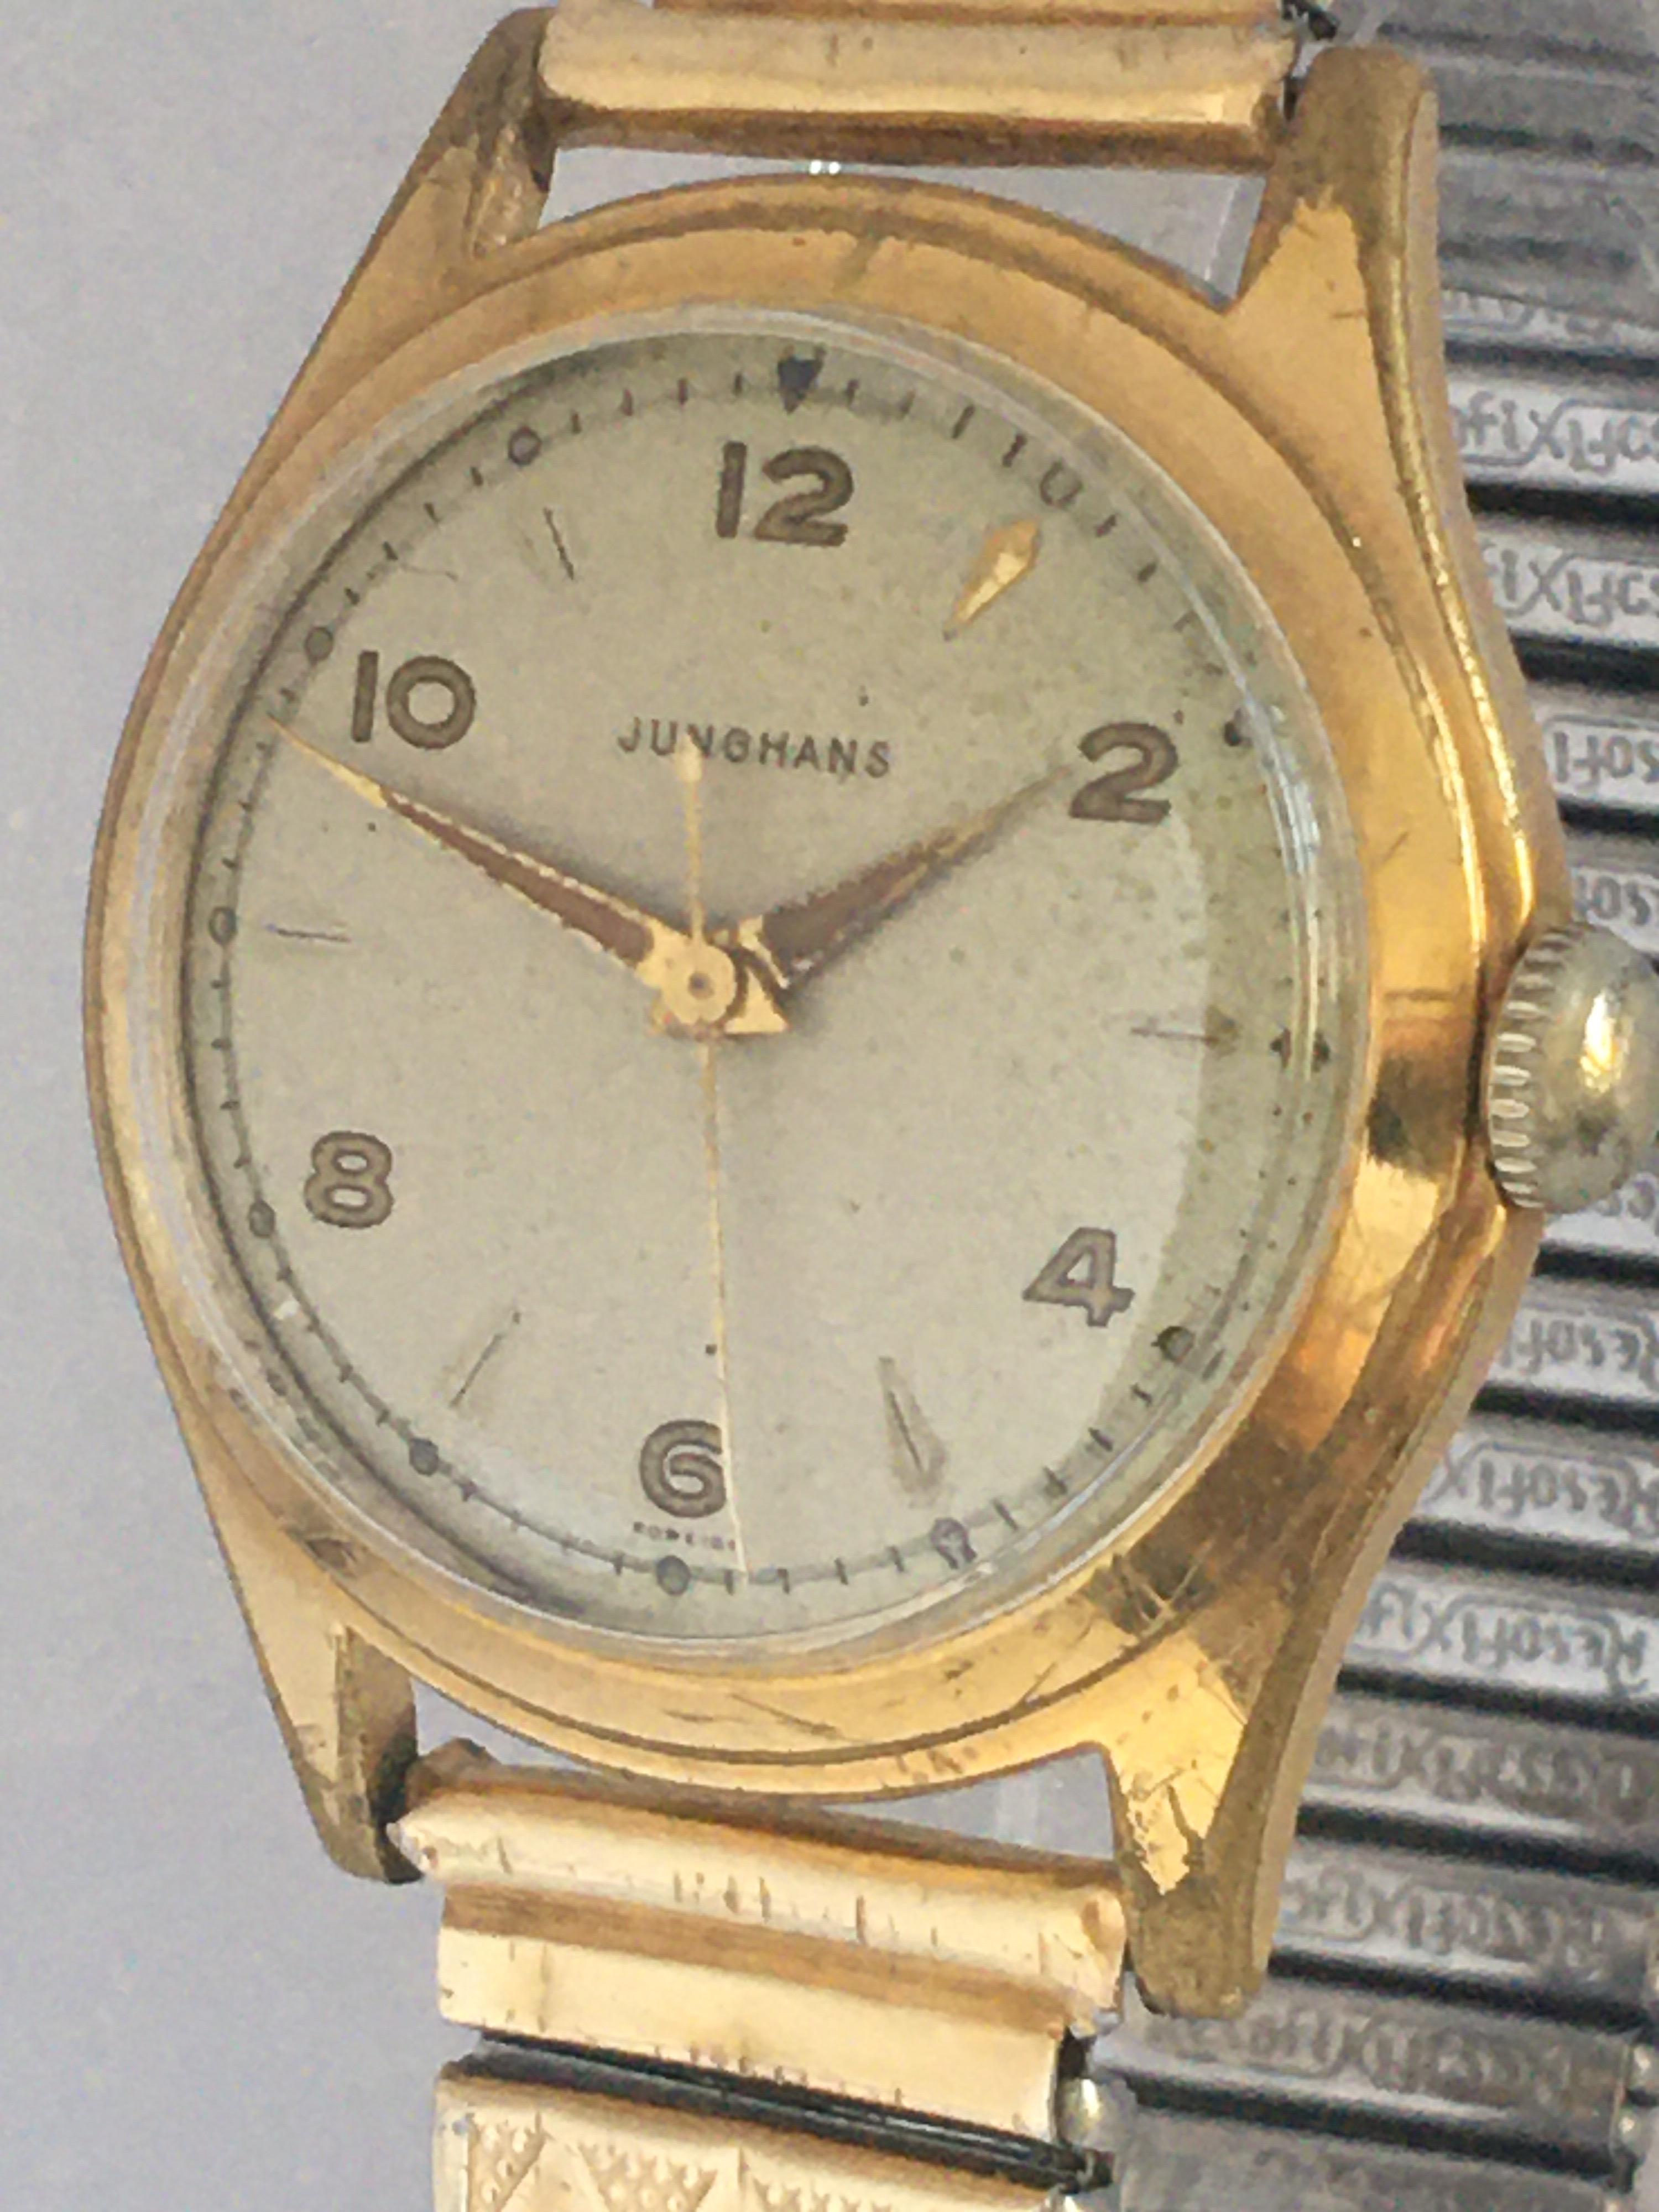 Vintage 1950s Gold-Plated Junghans Watch 5